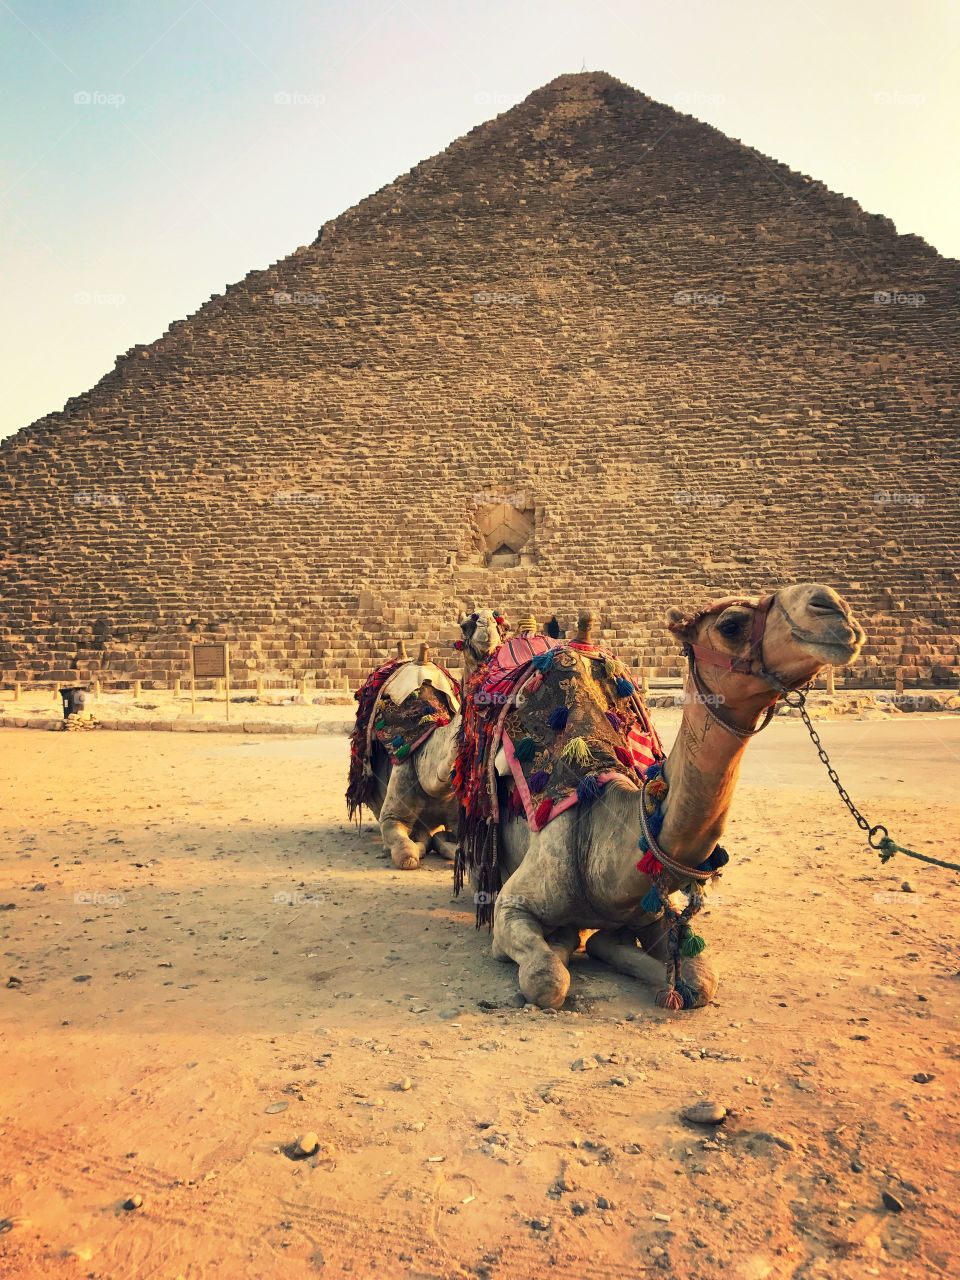 The Great Pyramids of Egypt 